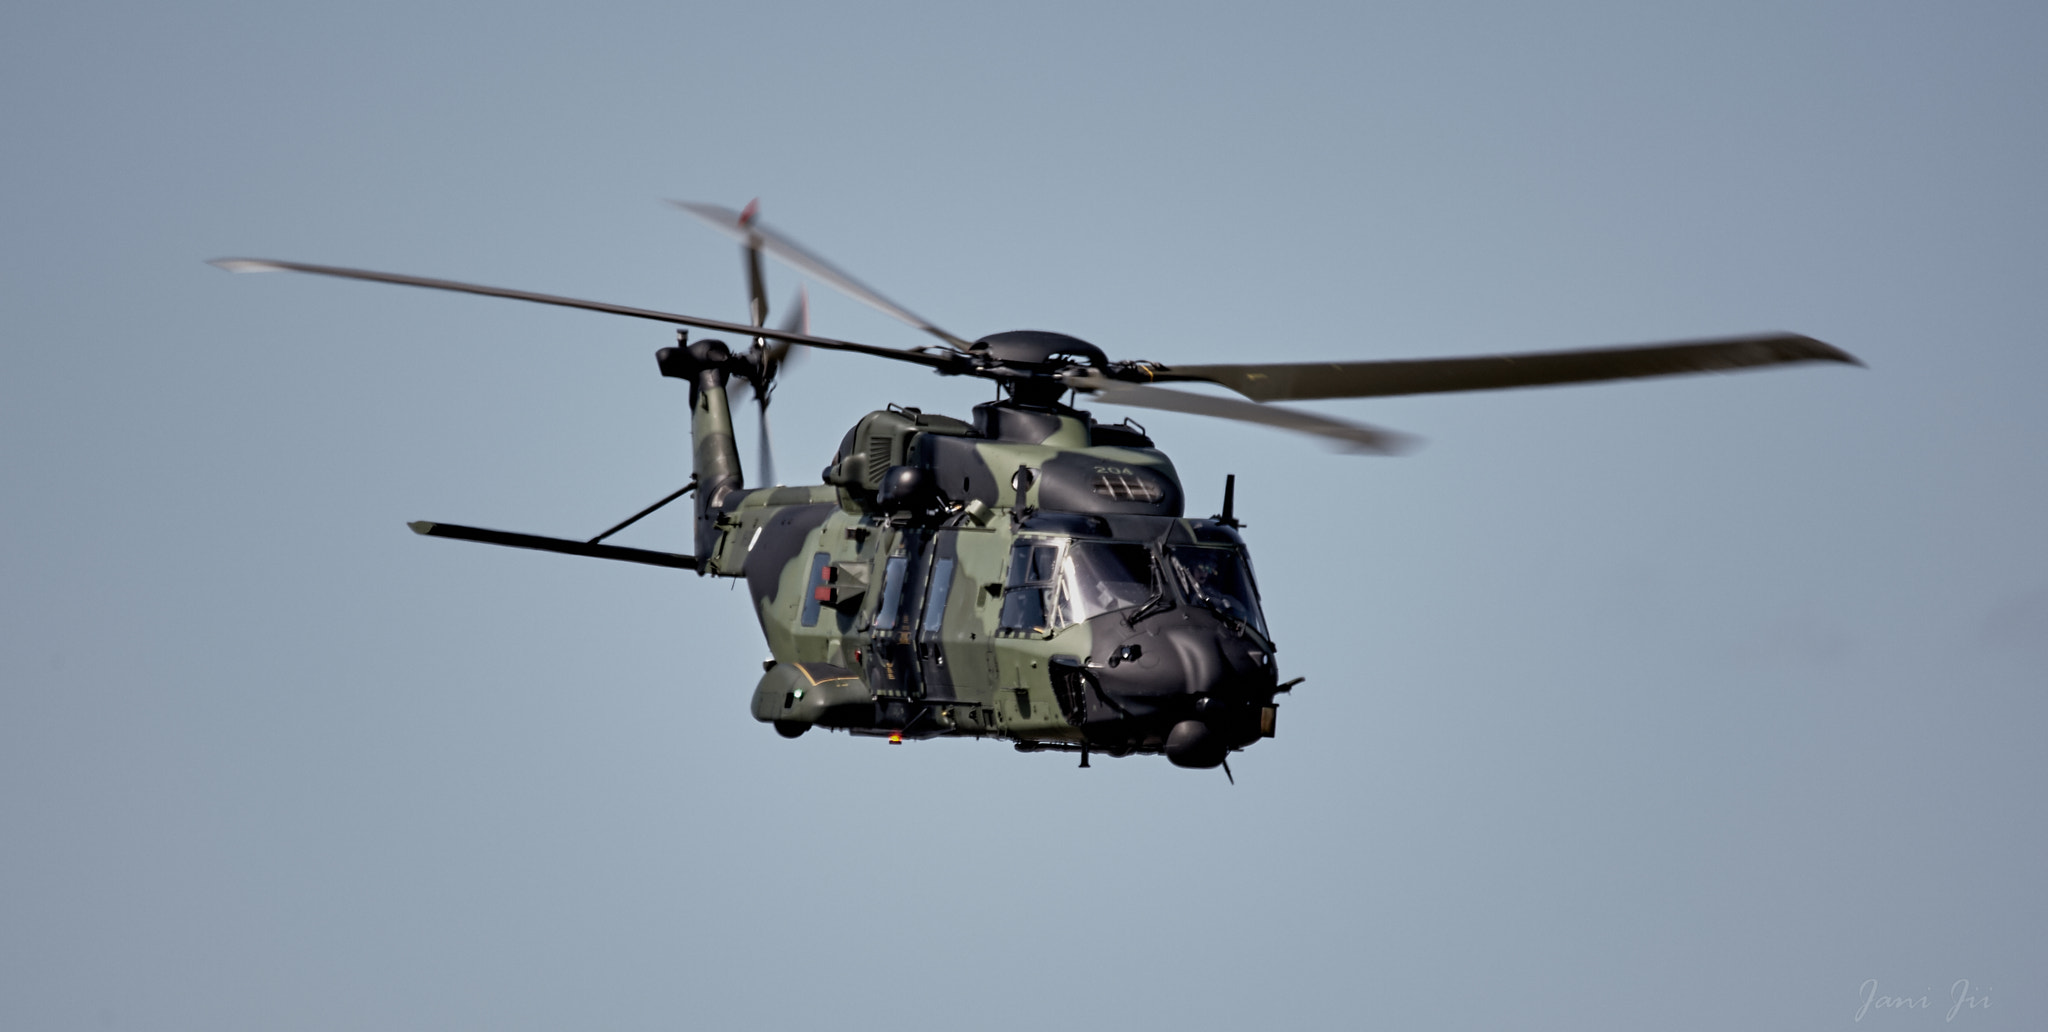 Canon EOS-1D Mark III + 150-600mm F5-6.3 DG OS HSM | Contemporary 015 sample photo. Nh90 approaching with full speed photography